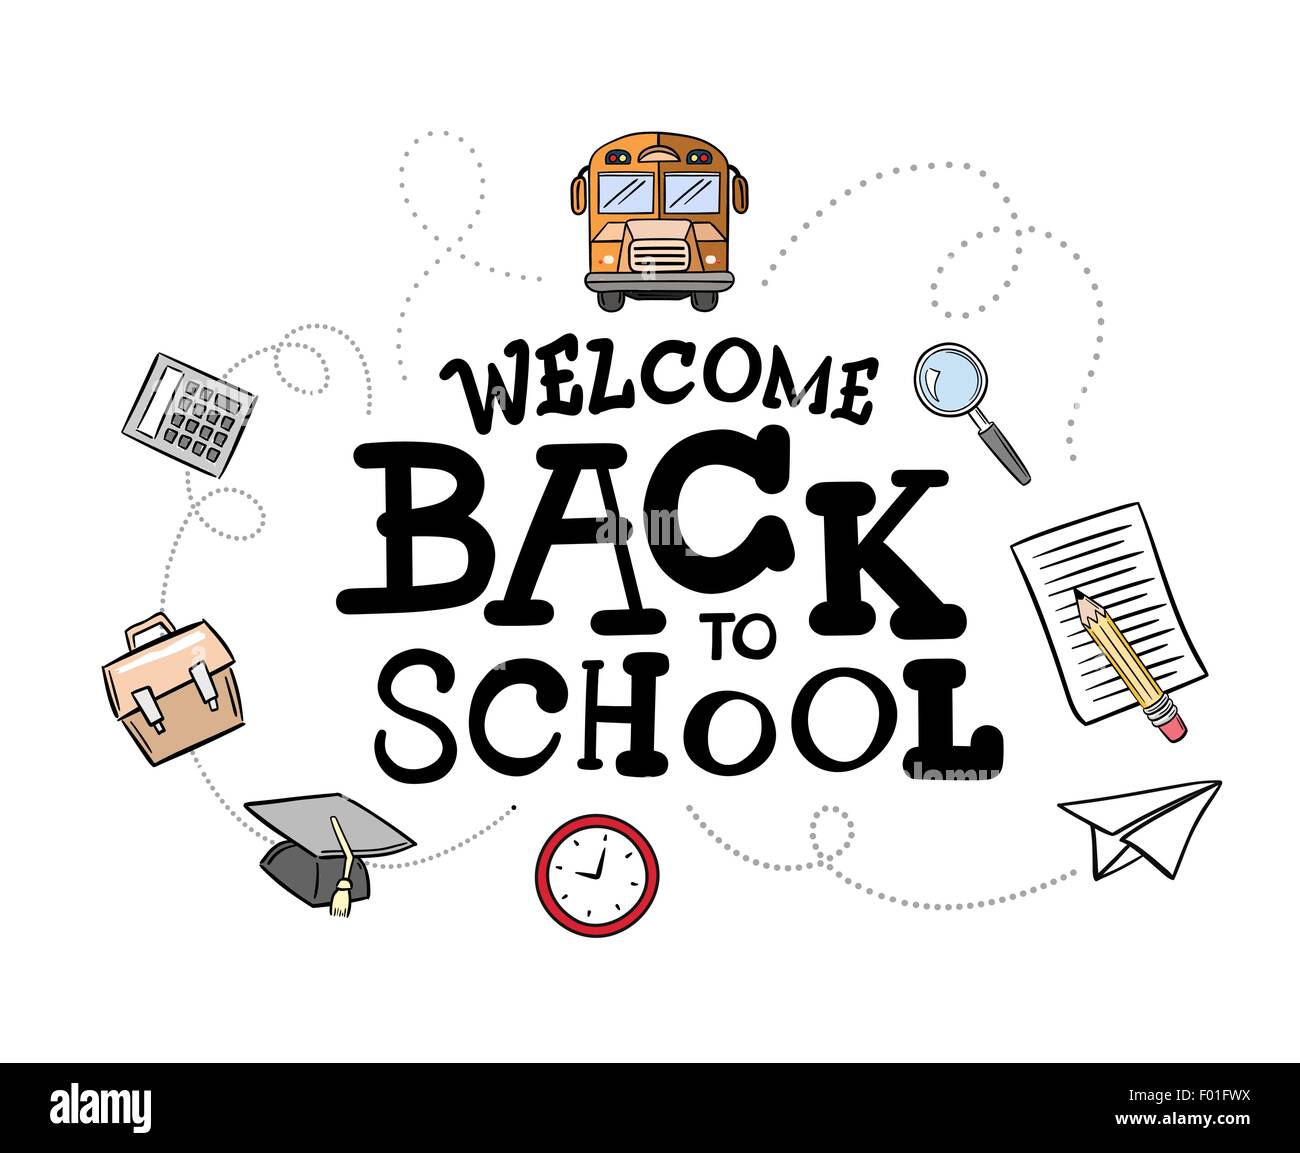 Welcome Back To School Message Surrounded By Icons Vector Against White Background Stock Vector Image Art Alamy